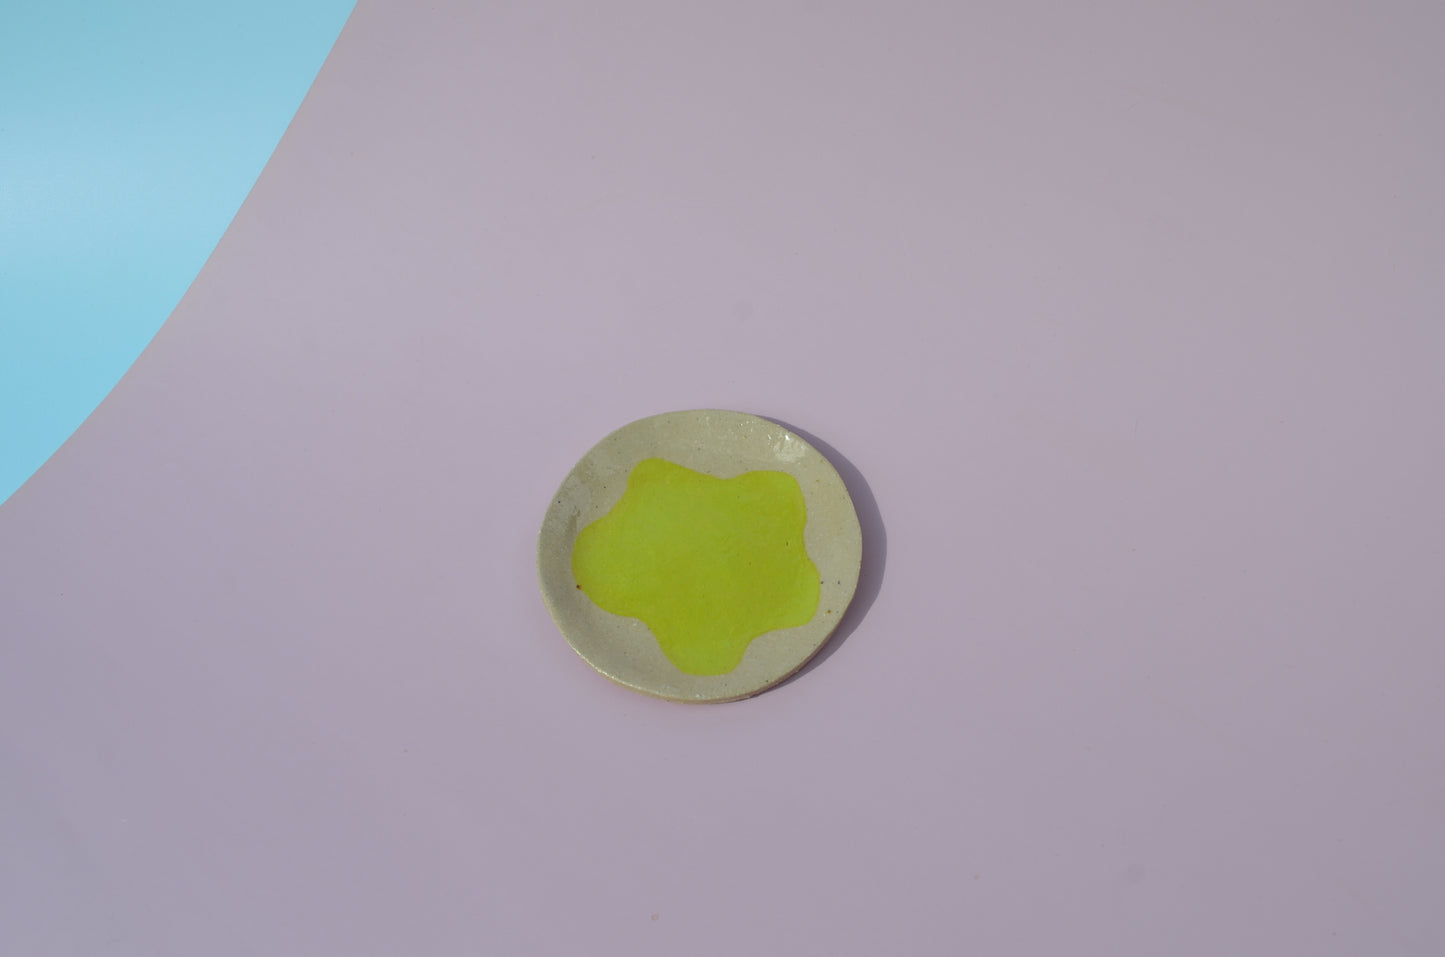 Picture of the tray from a birds eye perspective showing the lime green blob design on the tray.